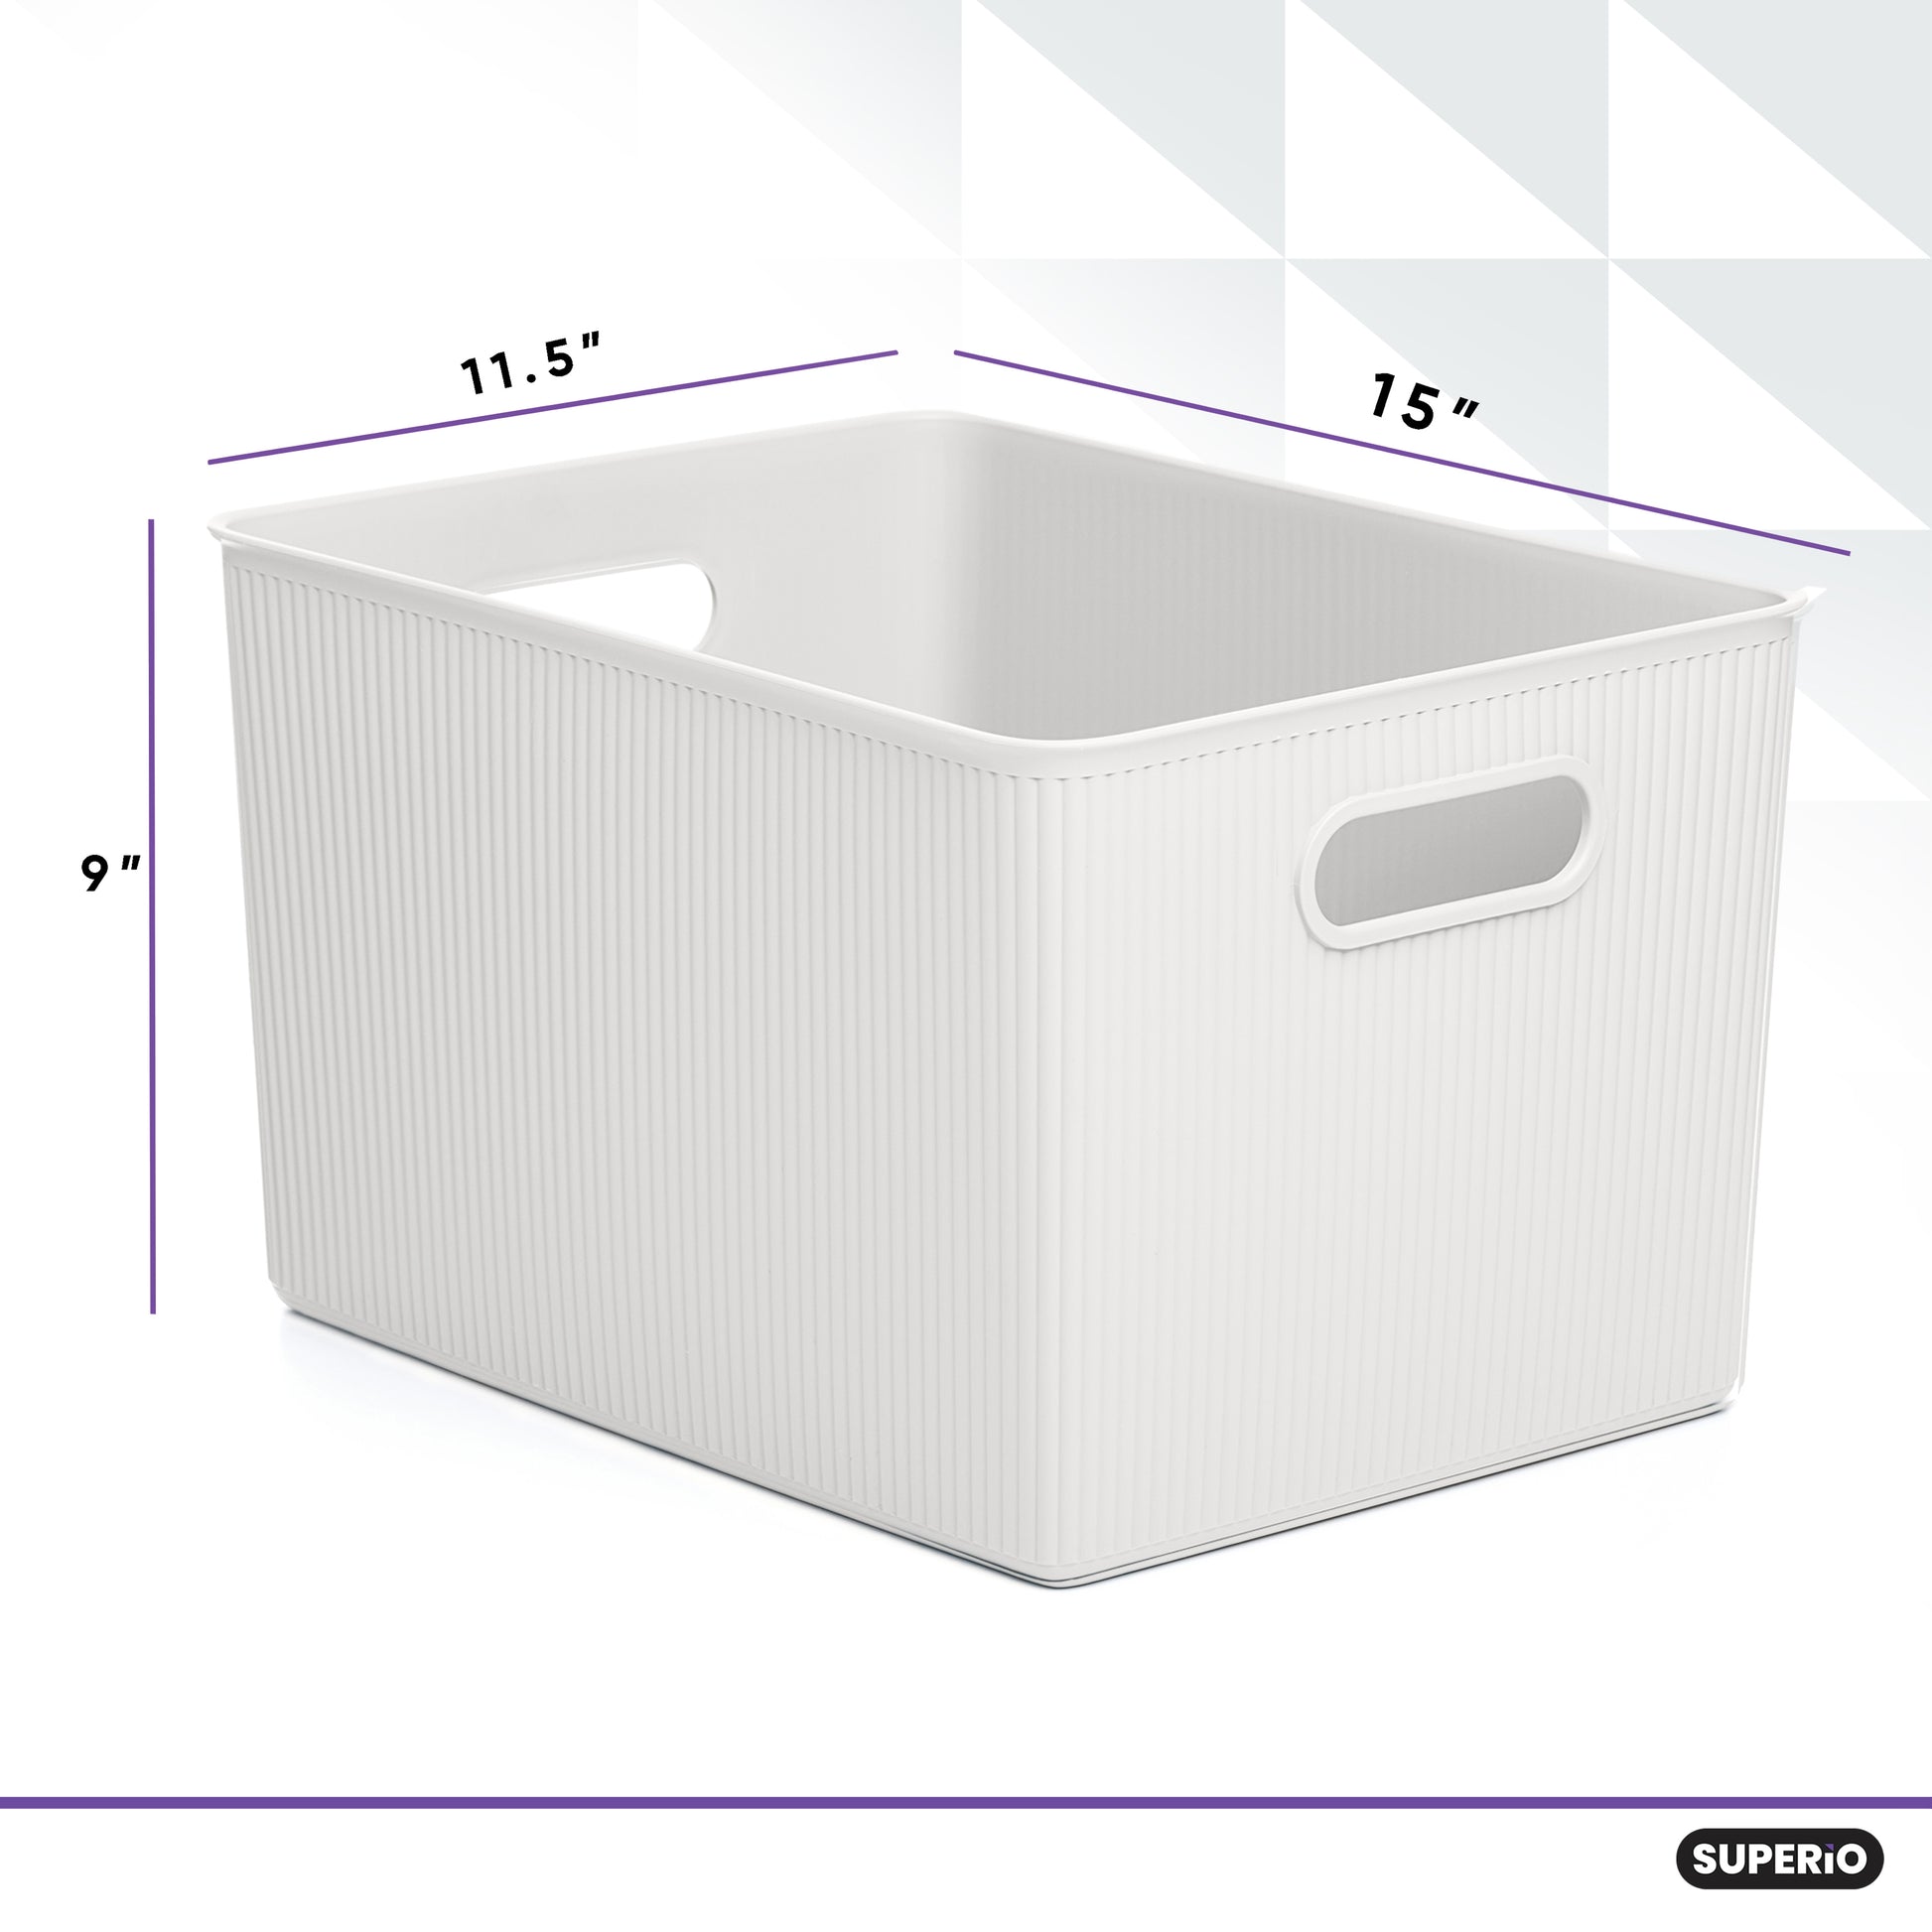 Superio Ribbed Collection - Decorative Plastic Open Home Storage Bins  Organizer Baskets, Medium White (1 Pack) Container Boxes for Organizing  Closet